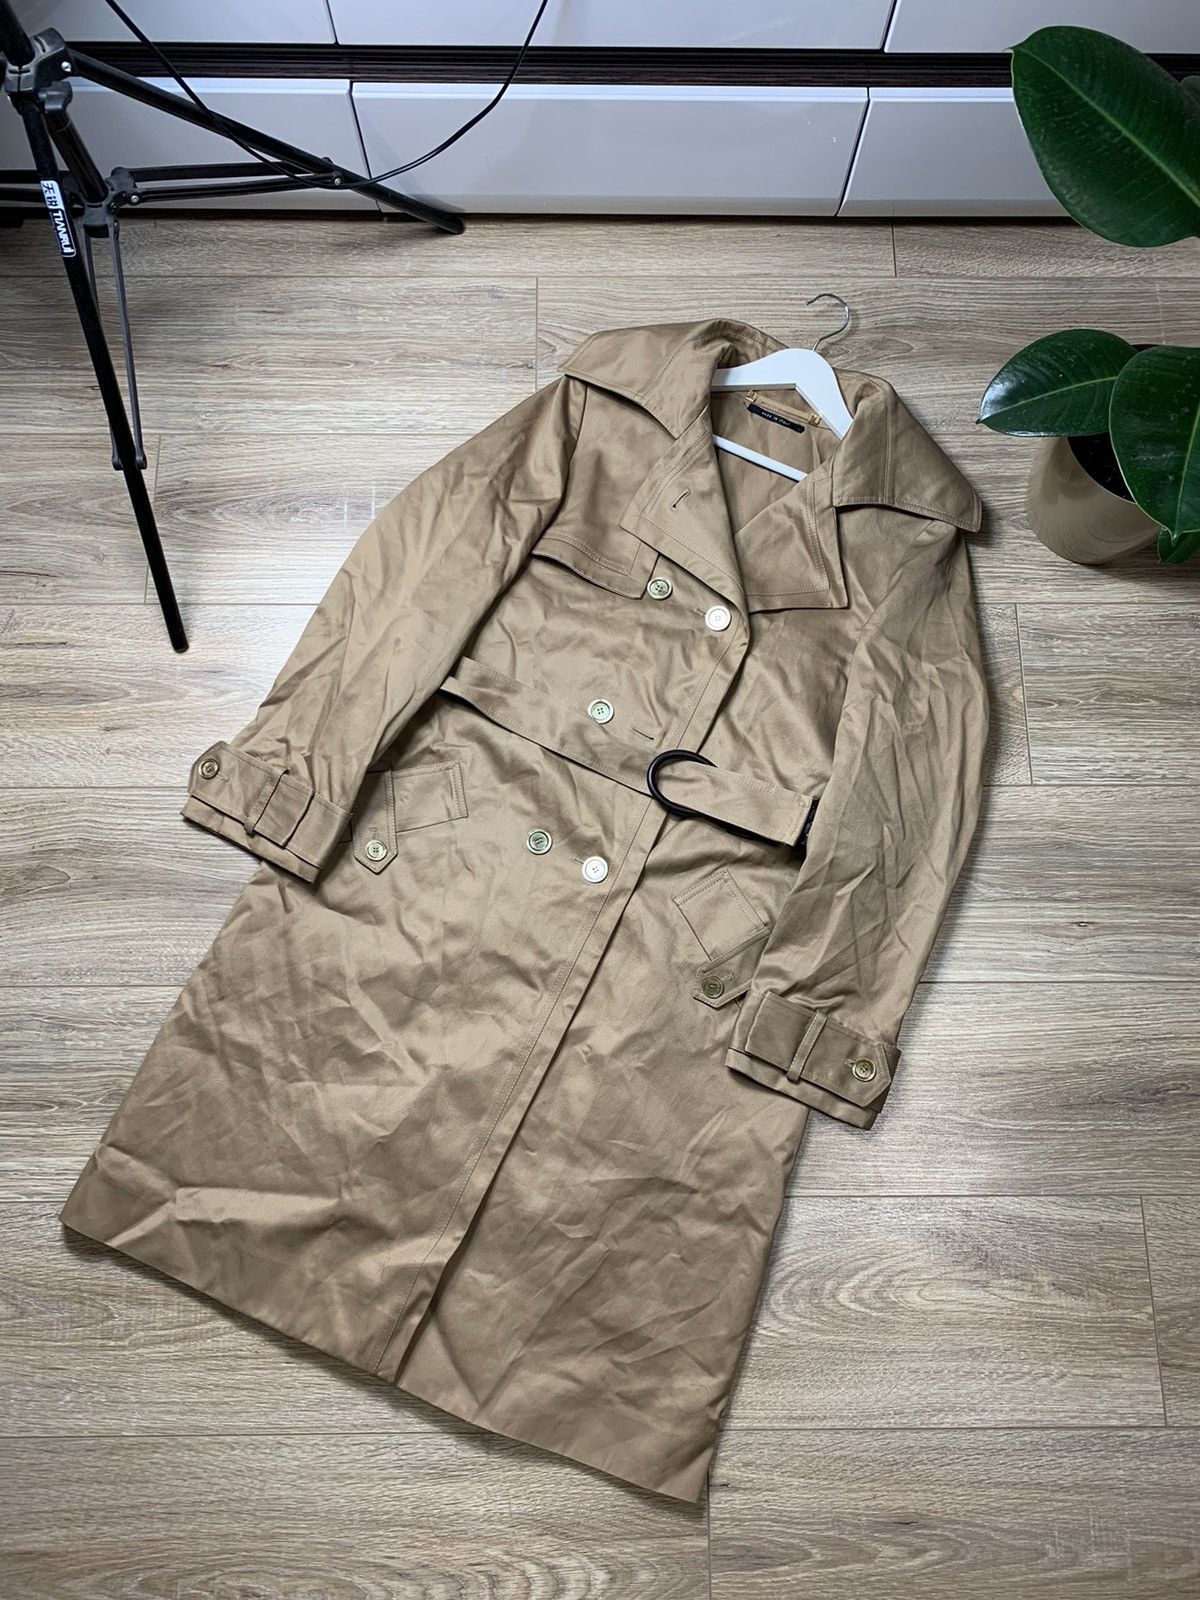 Gucci Gucci Trench Coats | Grailed